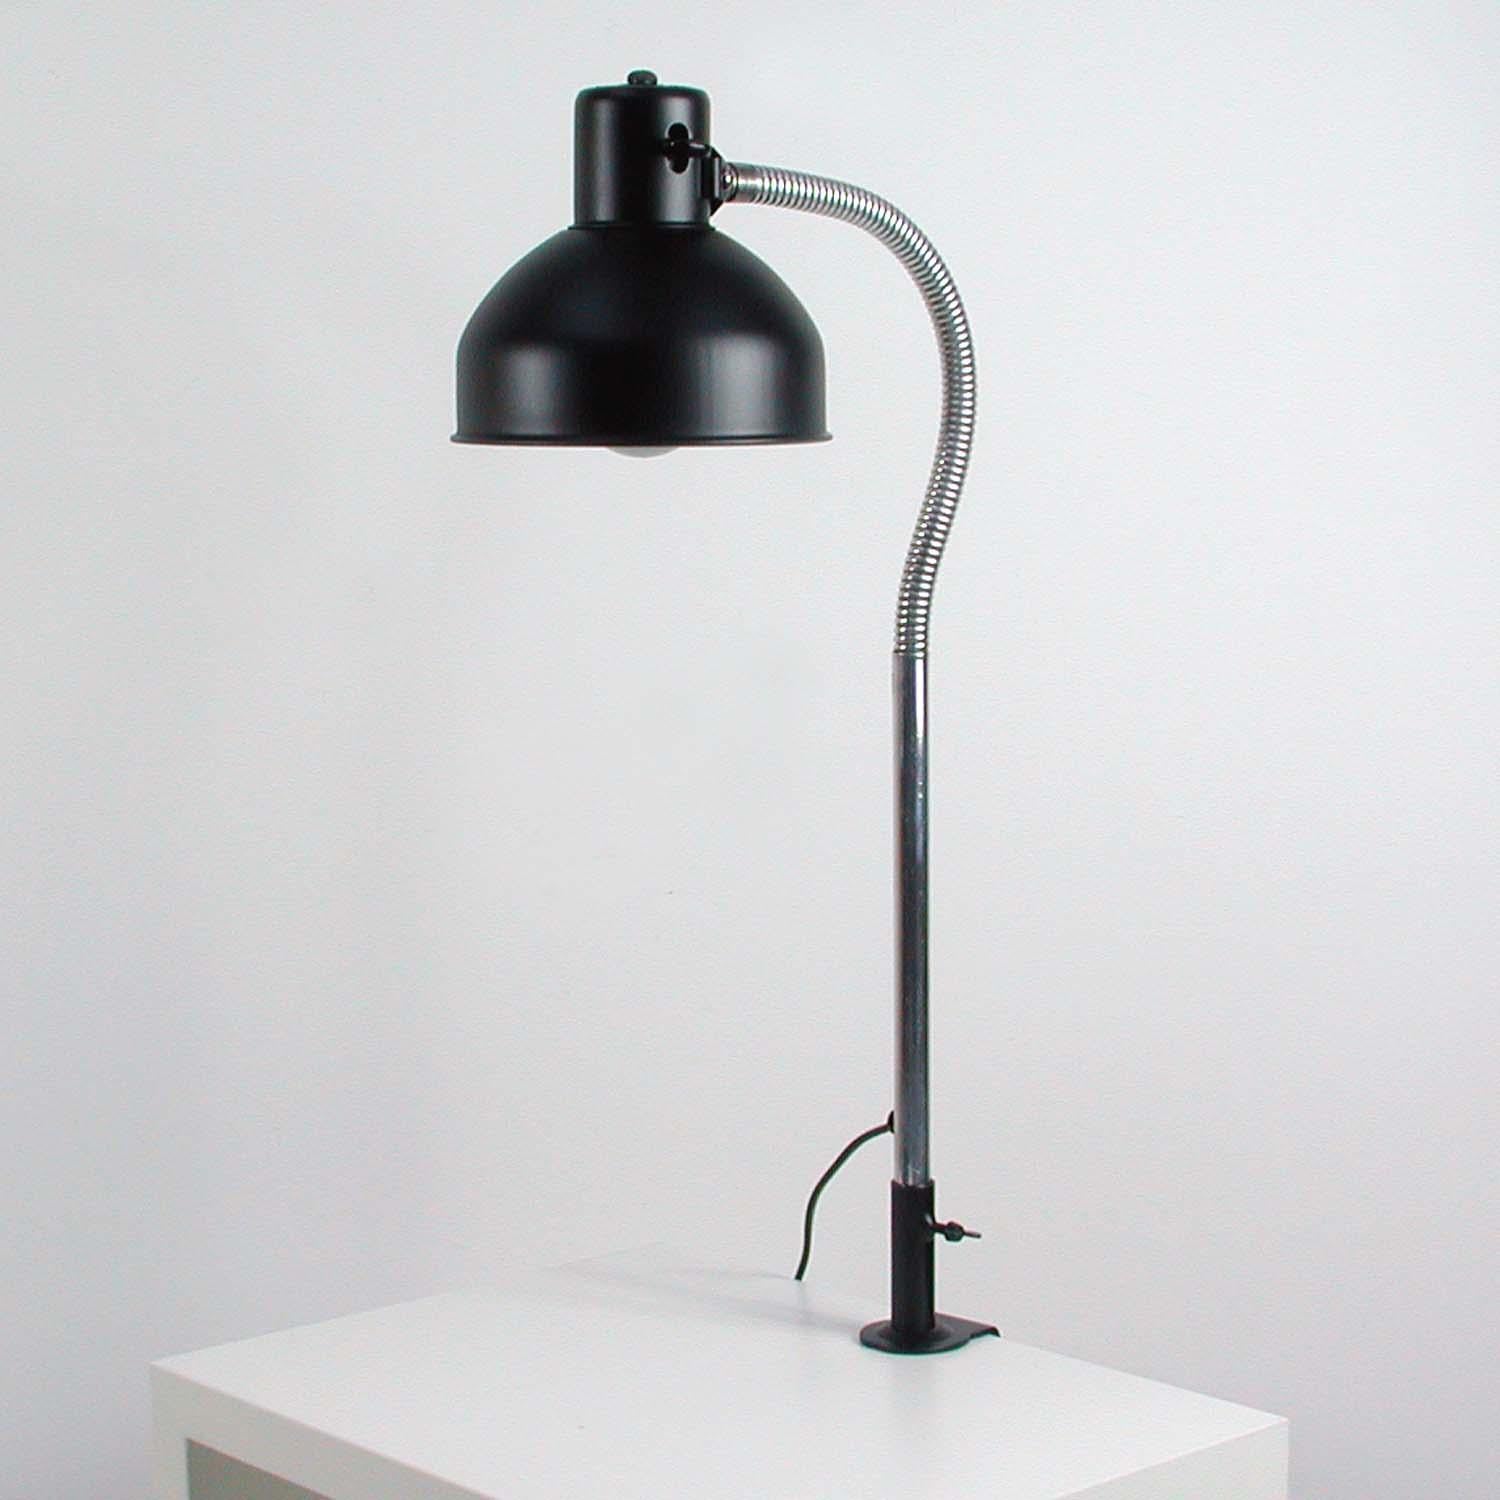 This 1950s Industrial work lamp was manufactured by Albert & Brause, in Neheim-Huesten in the 1950s. It is made of black lacquered steel and has got an adjustable chrome gooseneck lamp arm and adjustable shade. The switch is made of Bakelite.